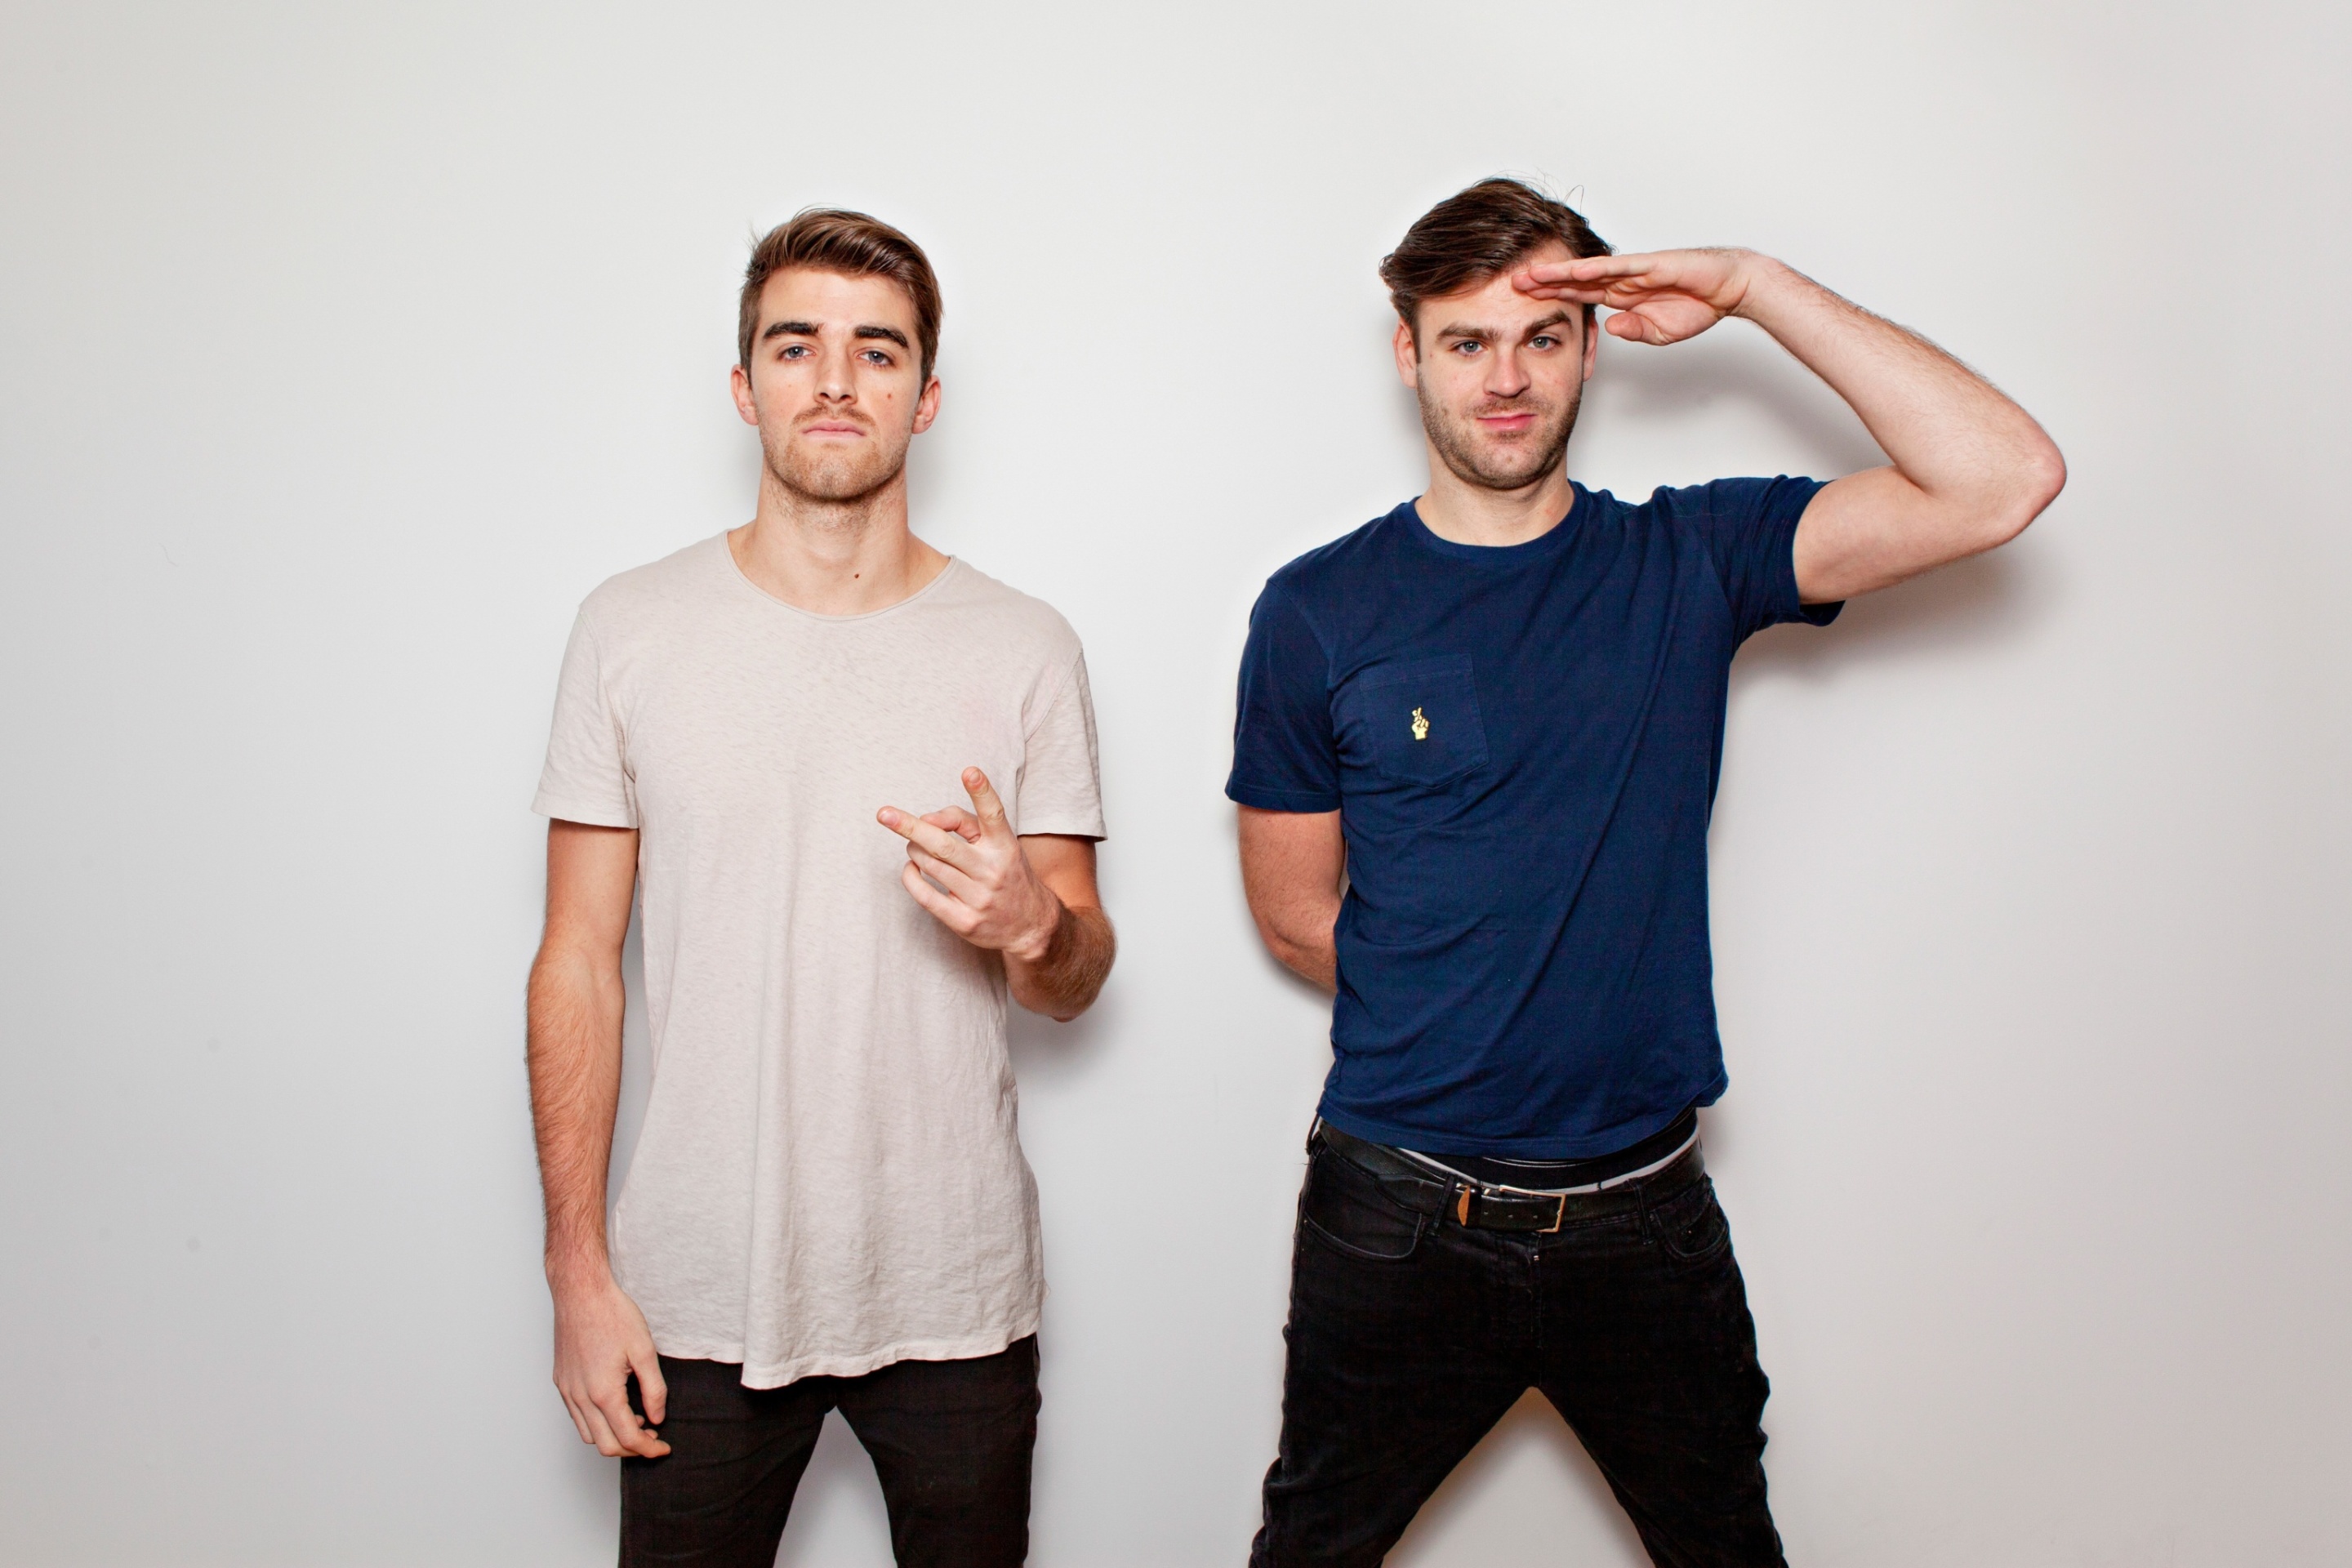 Das The Chainsmokers with Andrew Taggart and Alex Pall Wallpaper 2880x1920